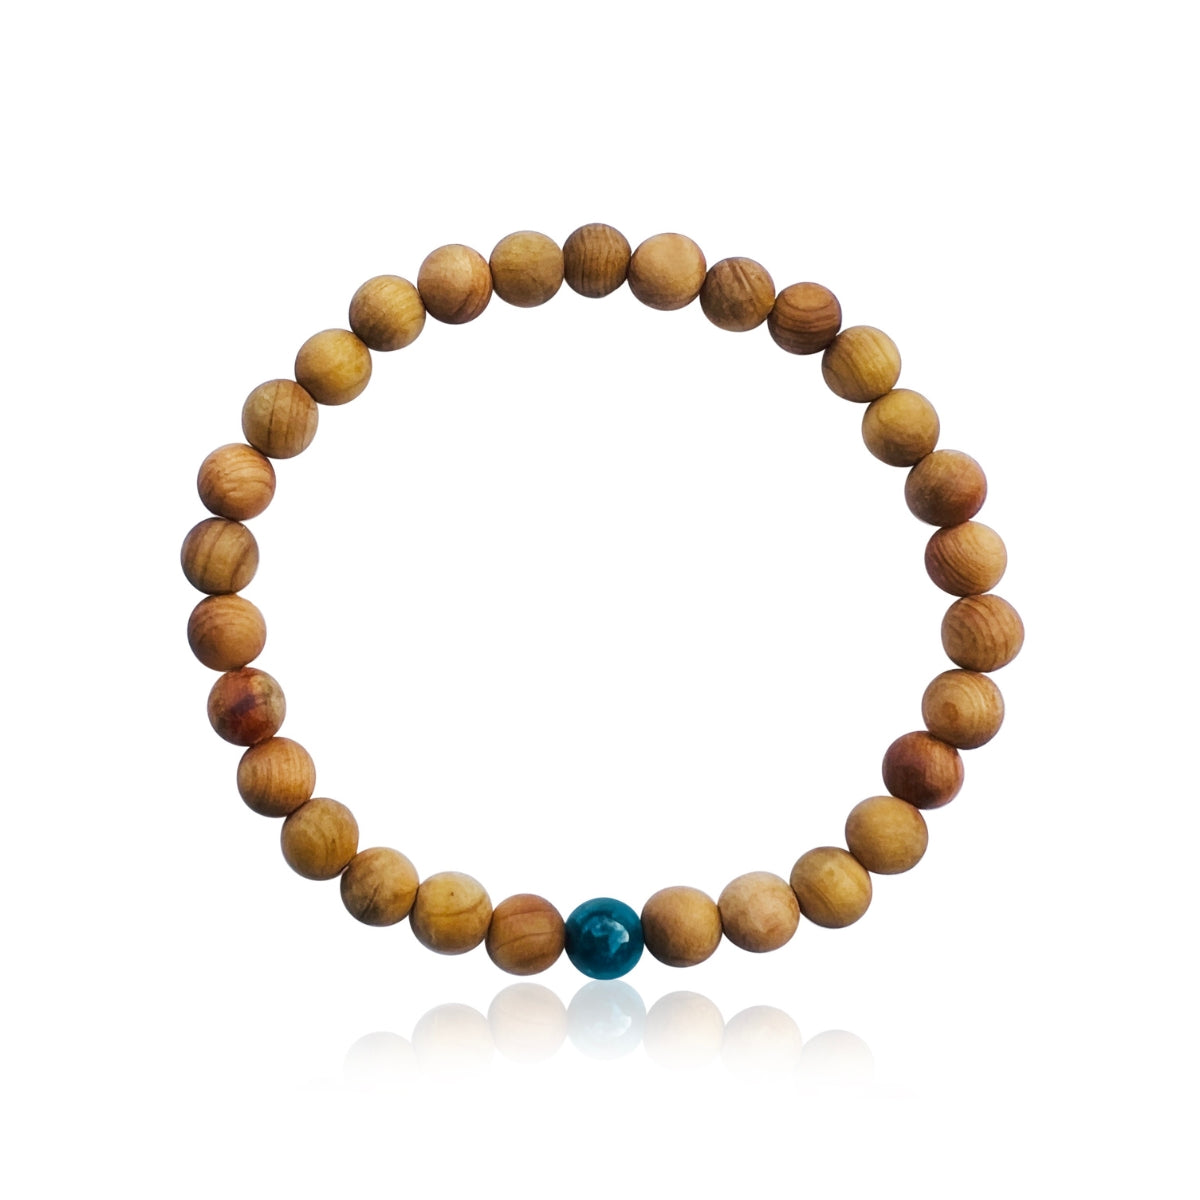 You are not alone. Ancient ancestors stand beside you. Wear this Ancestral Wisdom Sandalwood Bracelet to be reminded that you are supported. Sandalwood is believed to have strong spiritual properties. Said to bring people closer to the divine, inciting calmness and clearing the mind.